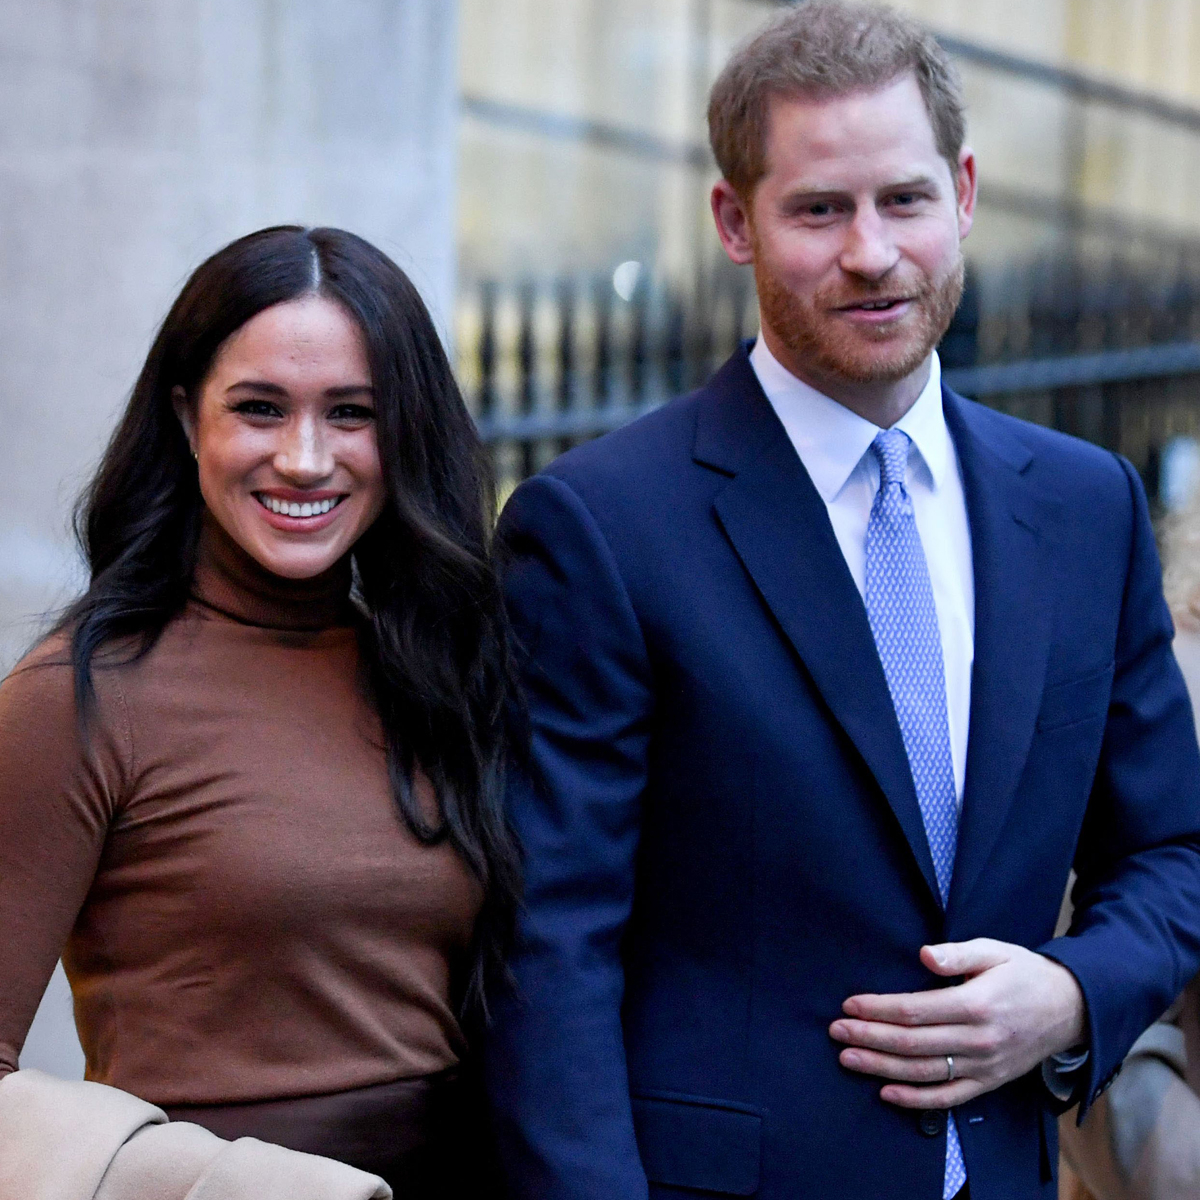 All the Details on Meghan Markle and Prince Harry's Surprise Visit With Women's Advocacy Group - E! NEWS